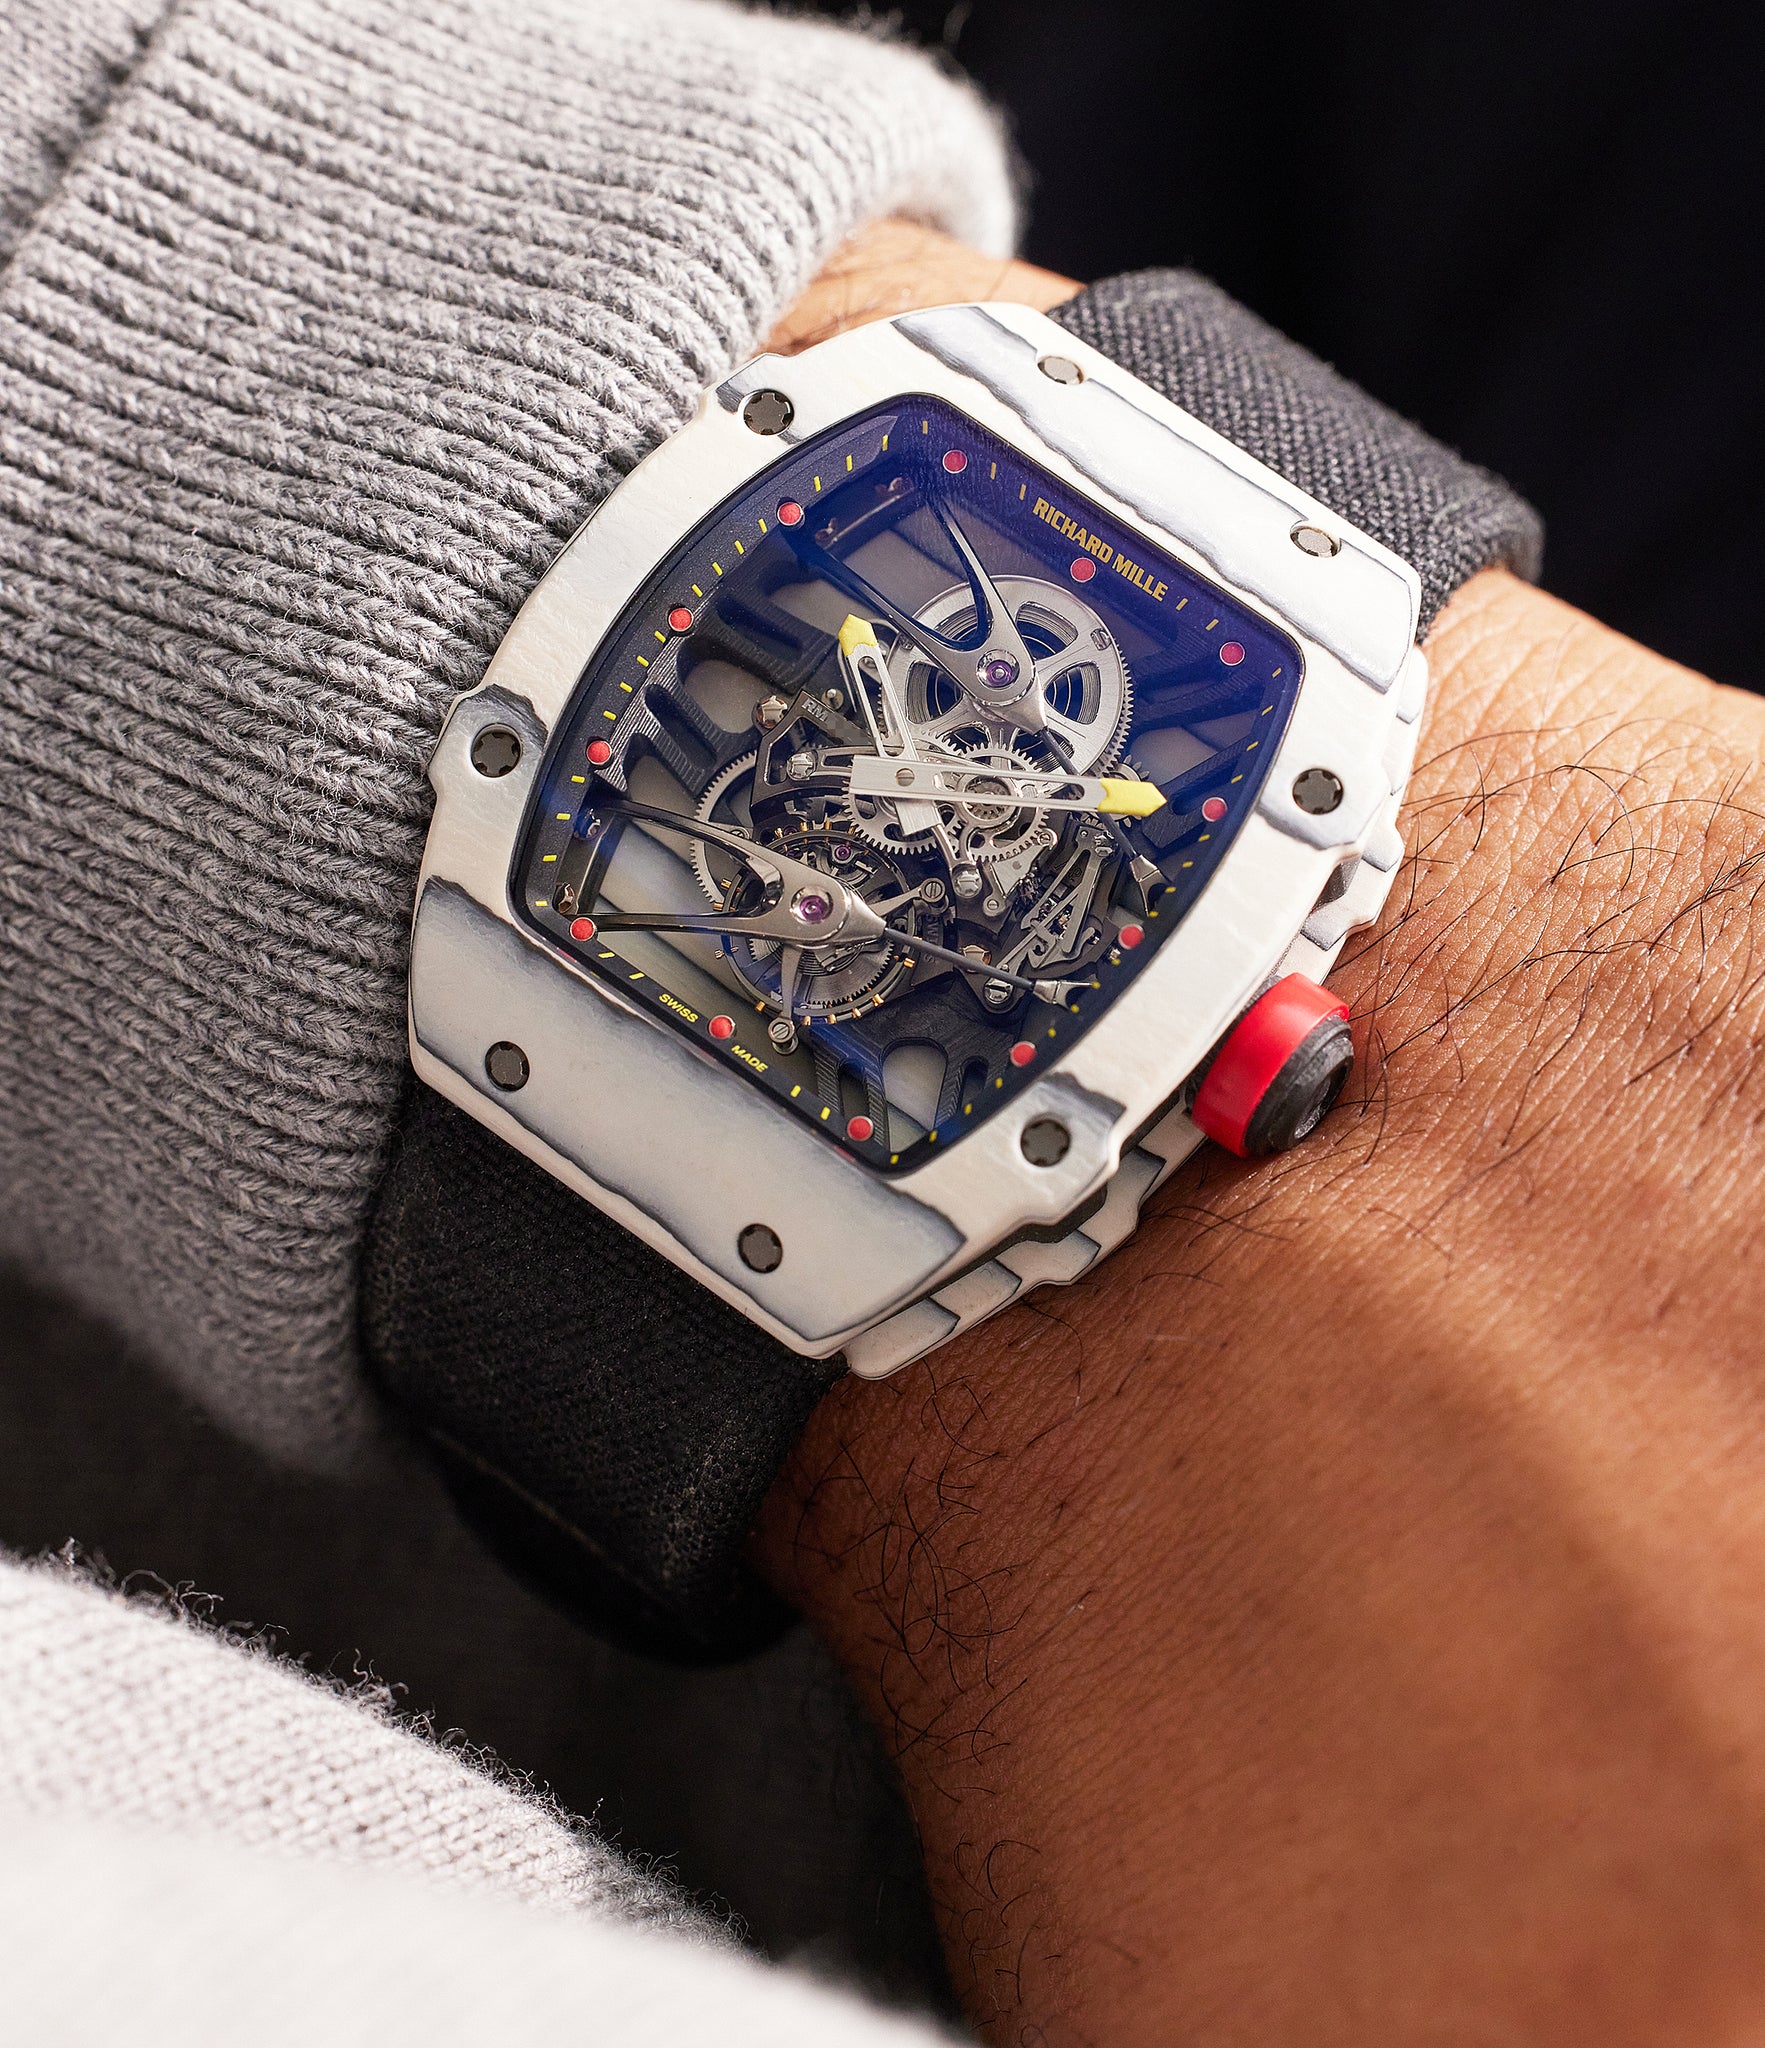 Richard Mille RM27-02 | Carbon TPT Skeletonised dial, tourbillon | On-wrist | A Collected Man